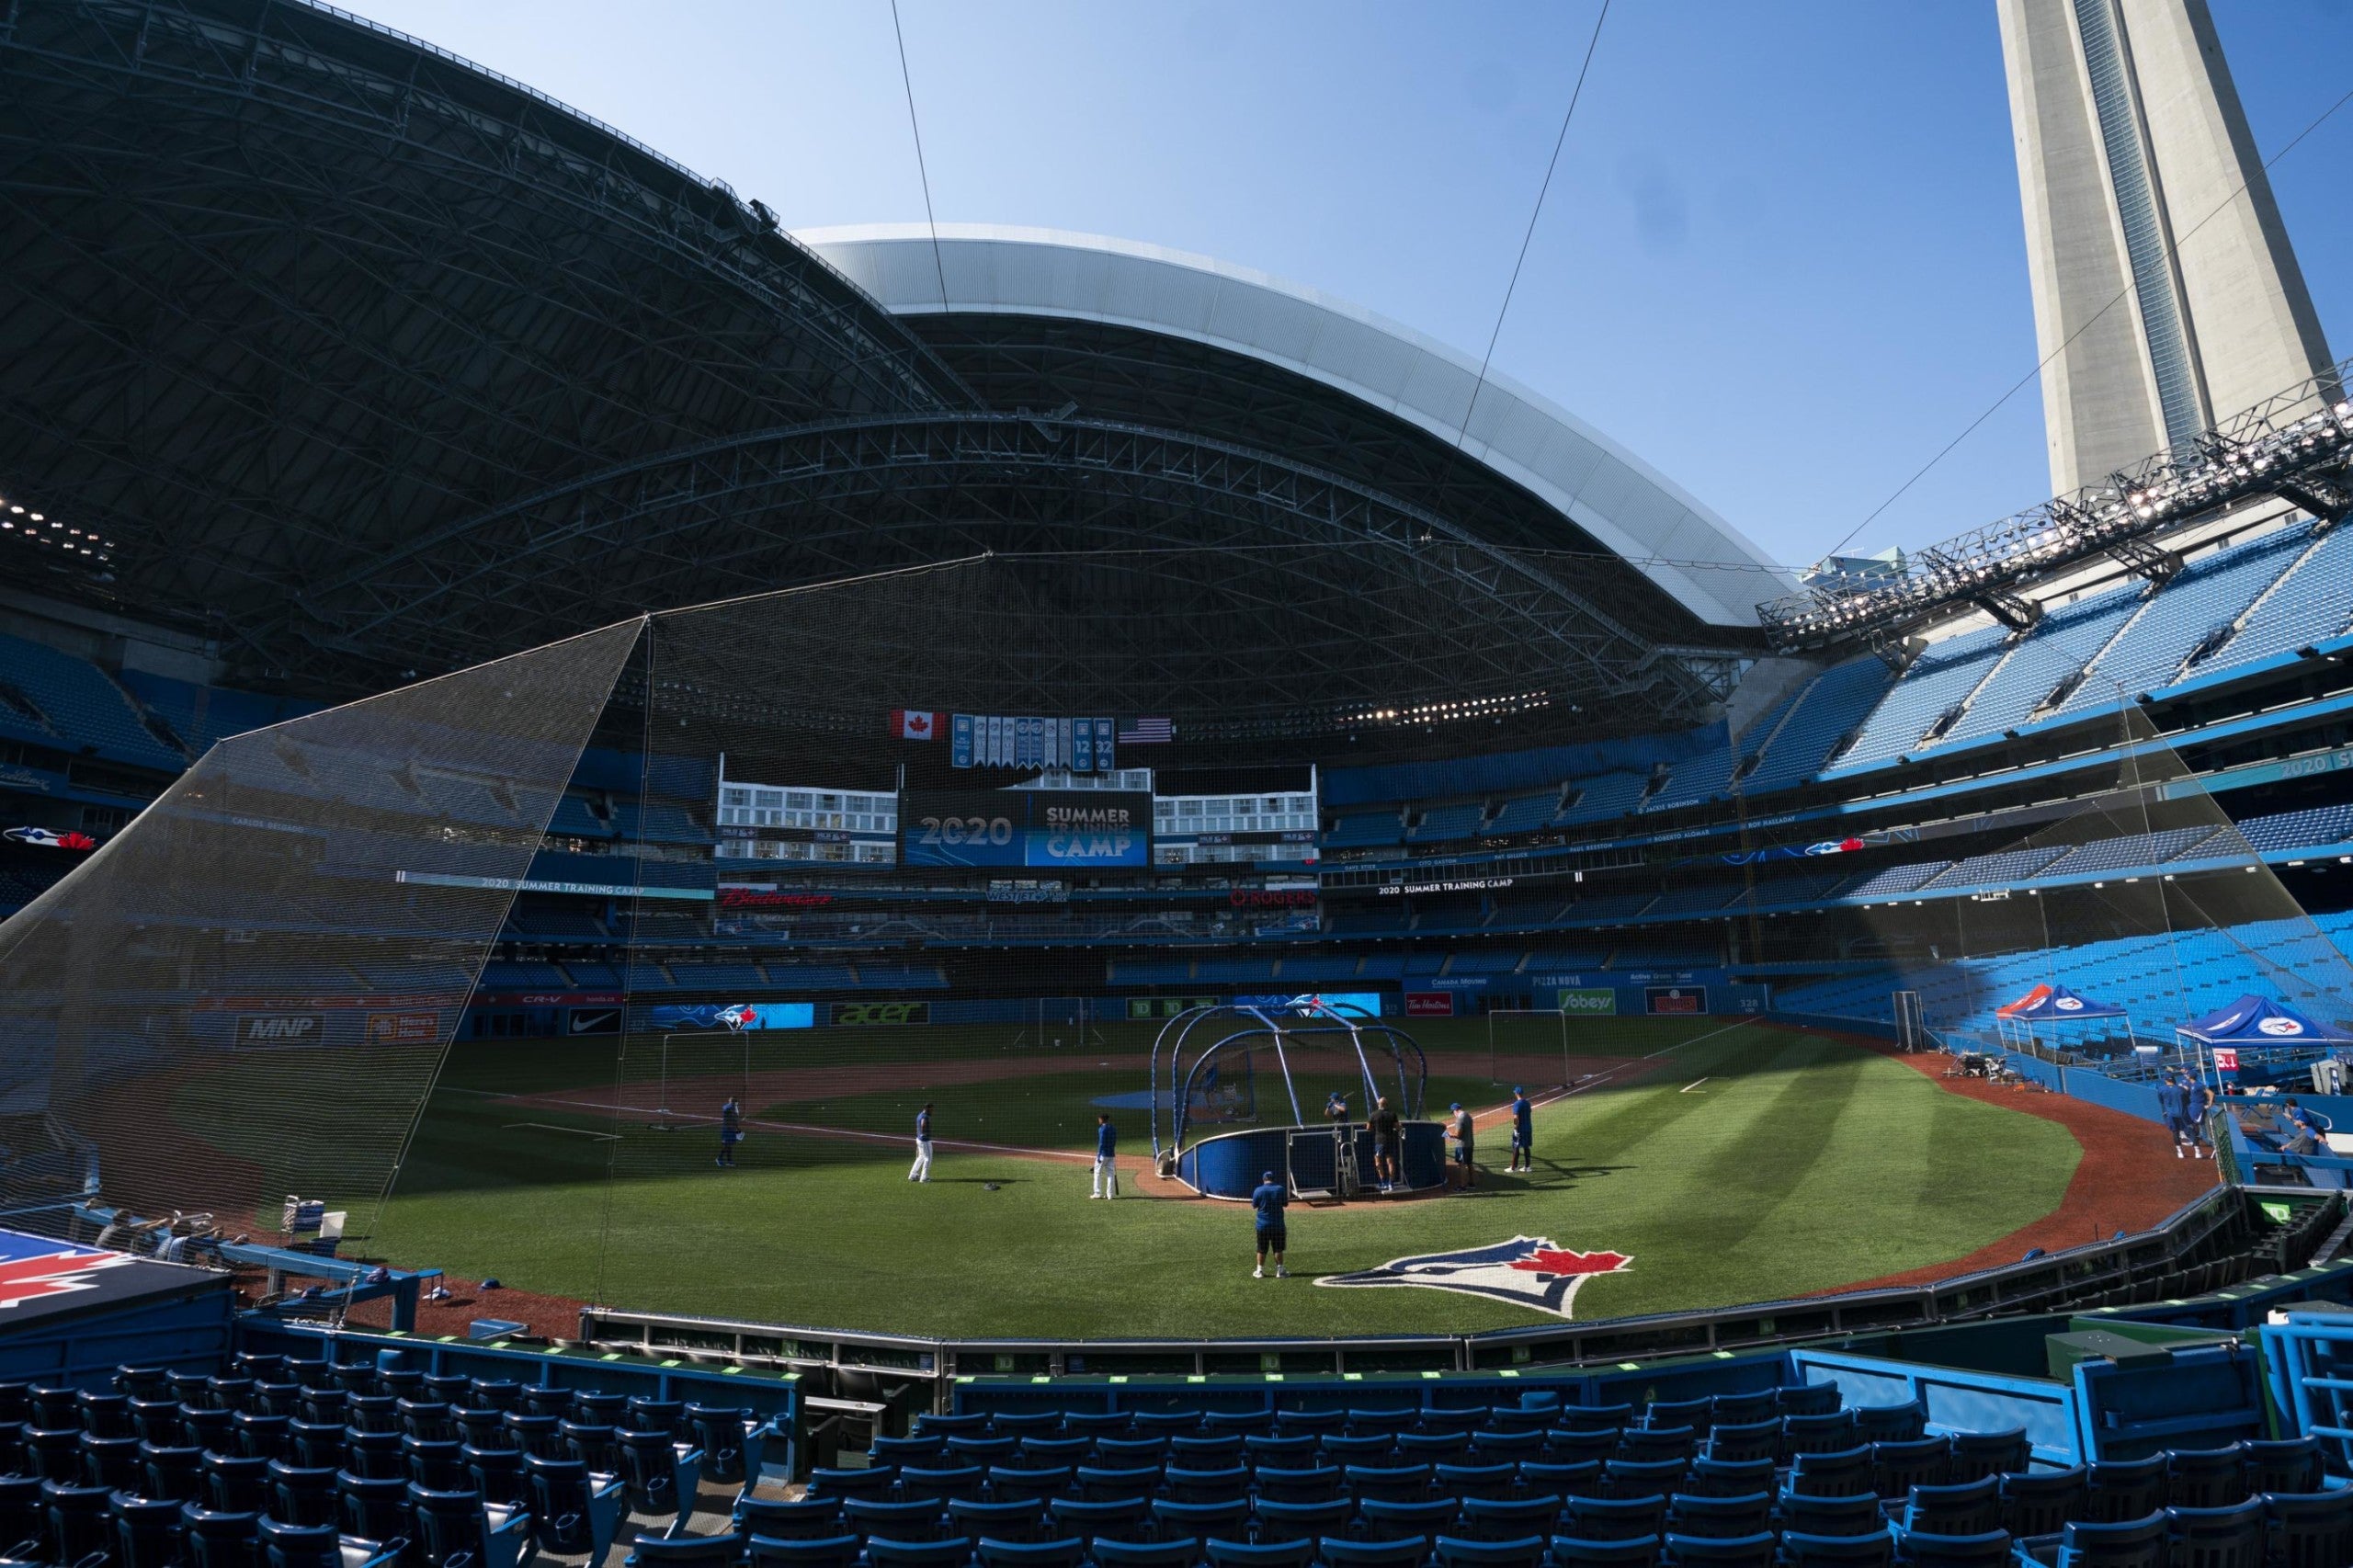 Toronto Blue Jays barred from playing games in home stadium - WISH